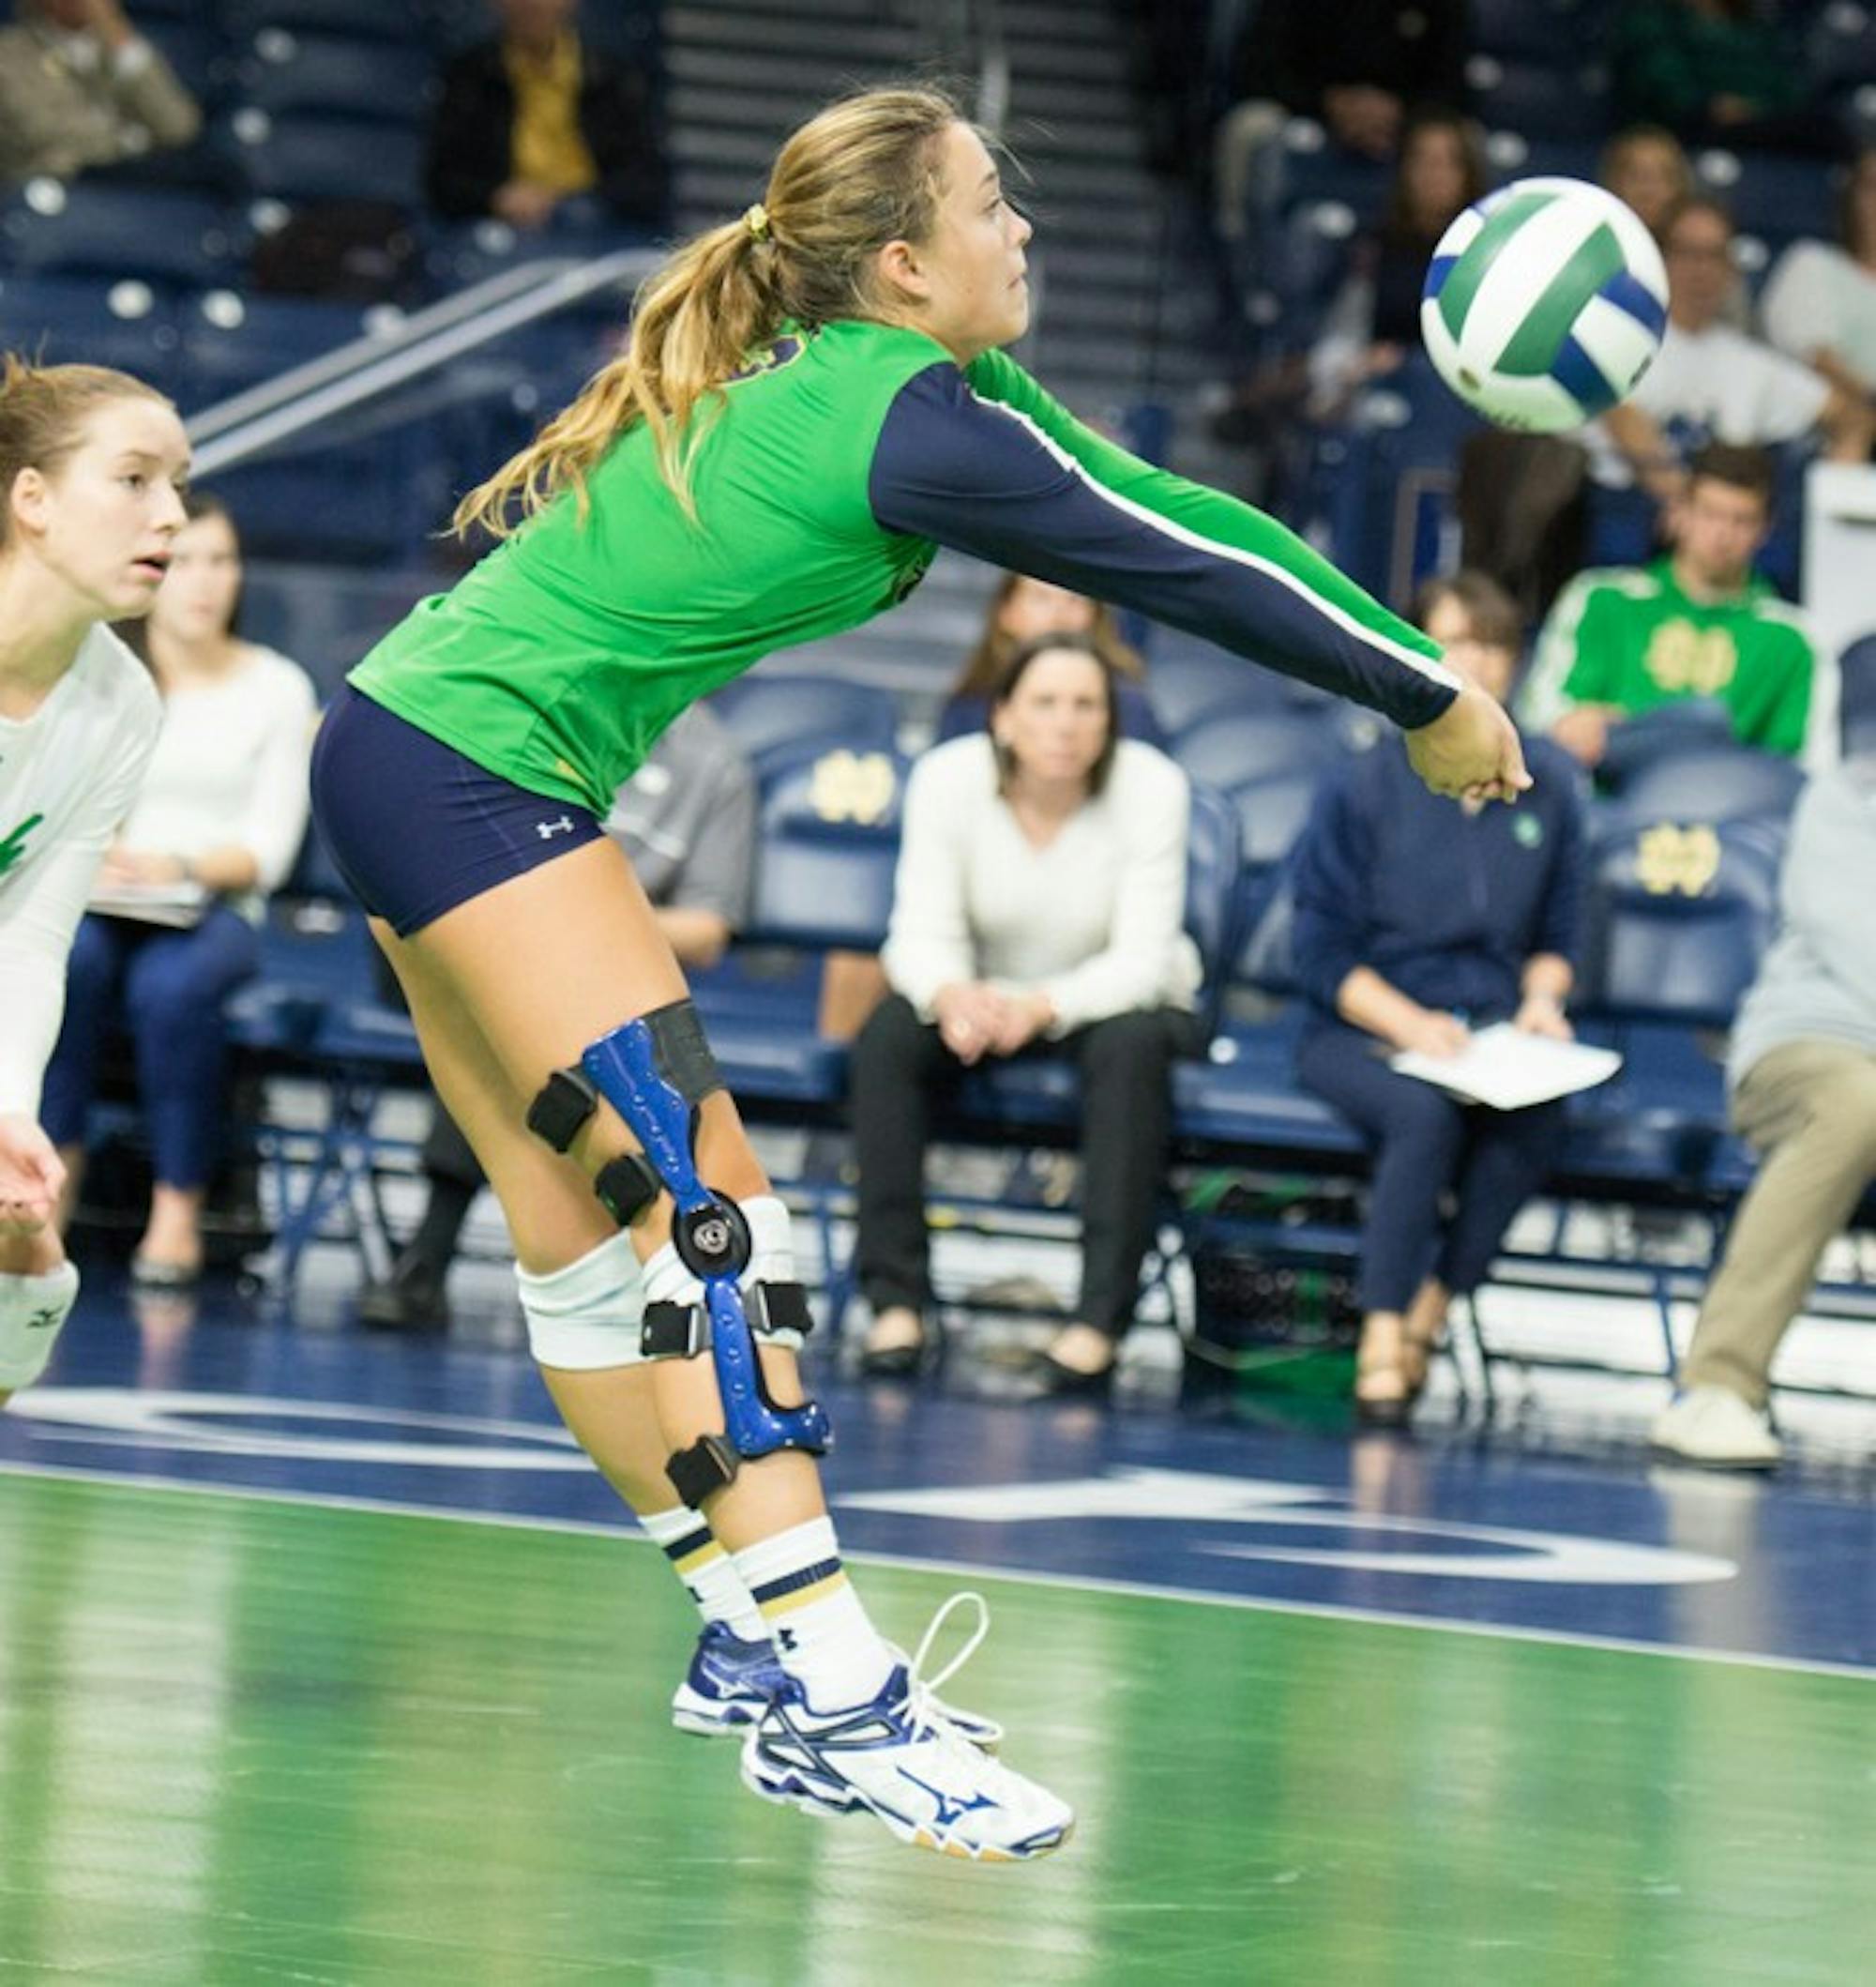 Freshman libero Natalie Johnson bumps the ball in Notre Dame’s 3-1 win against Northeastern on Saturday at Purcell Pavilion.